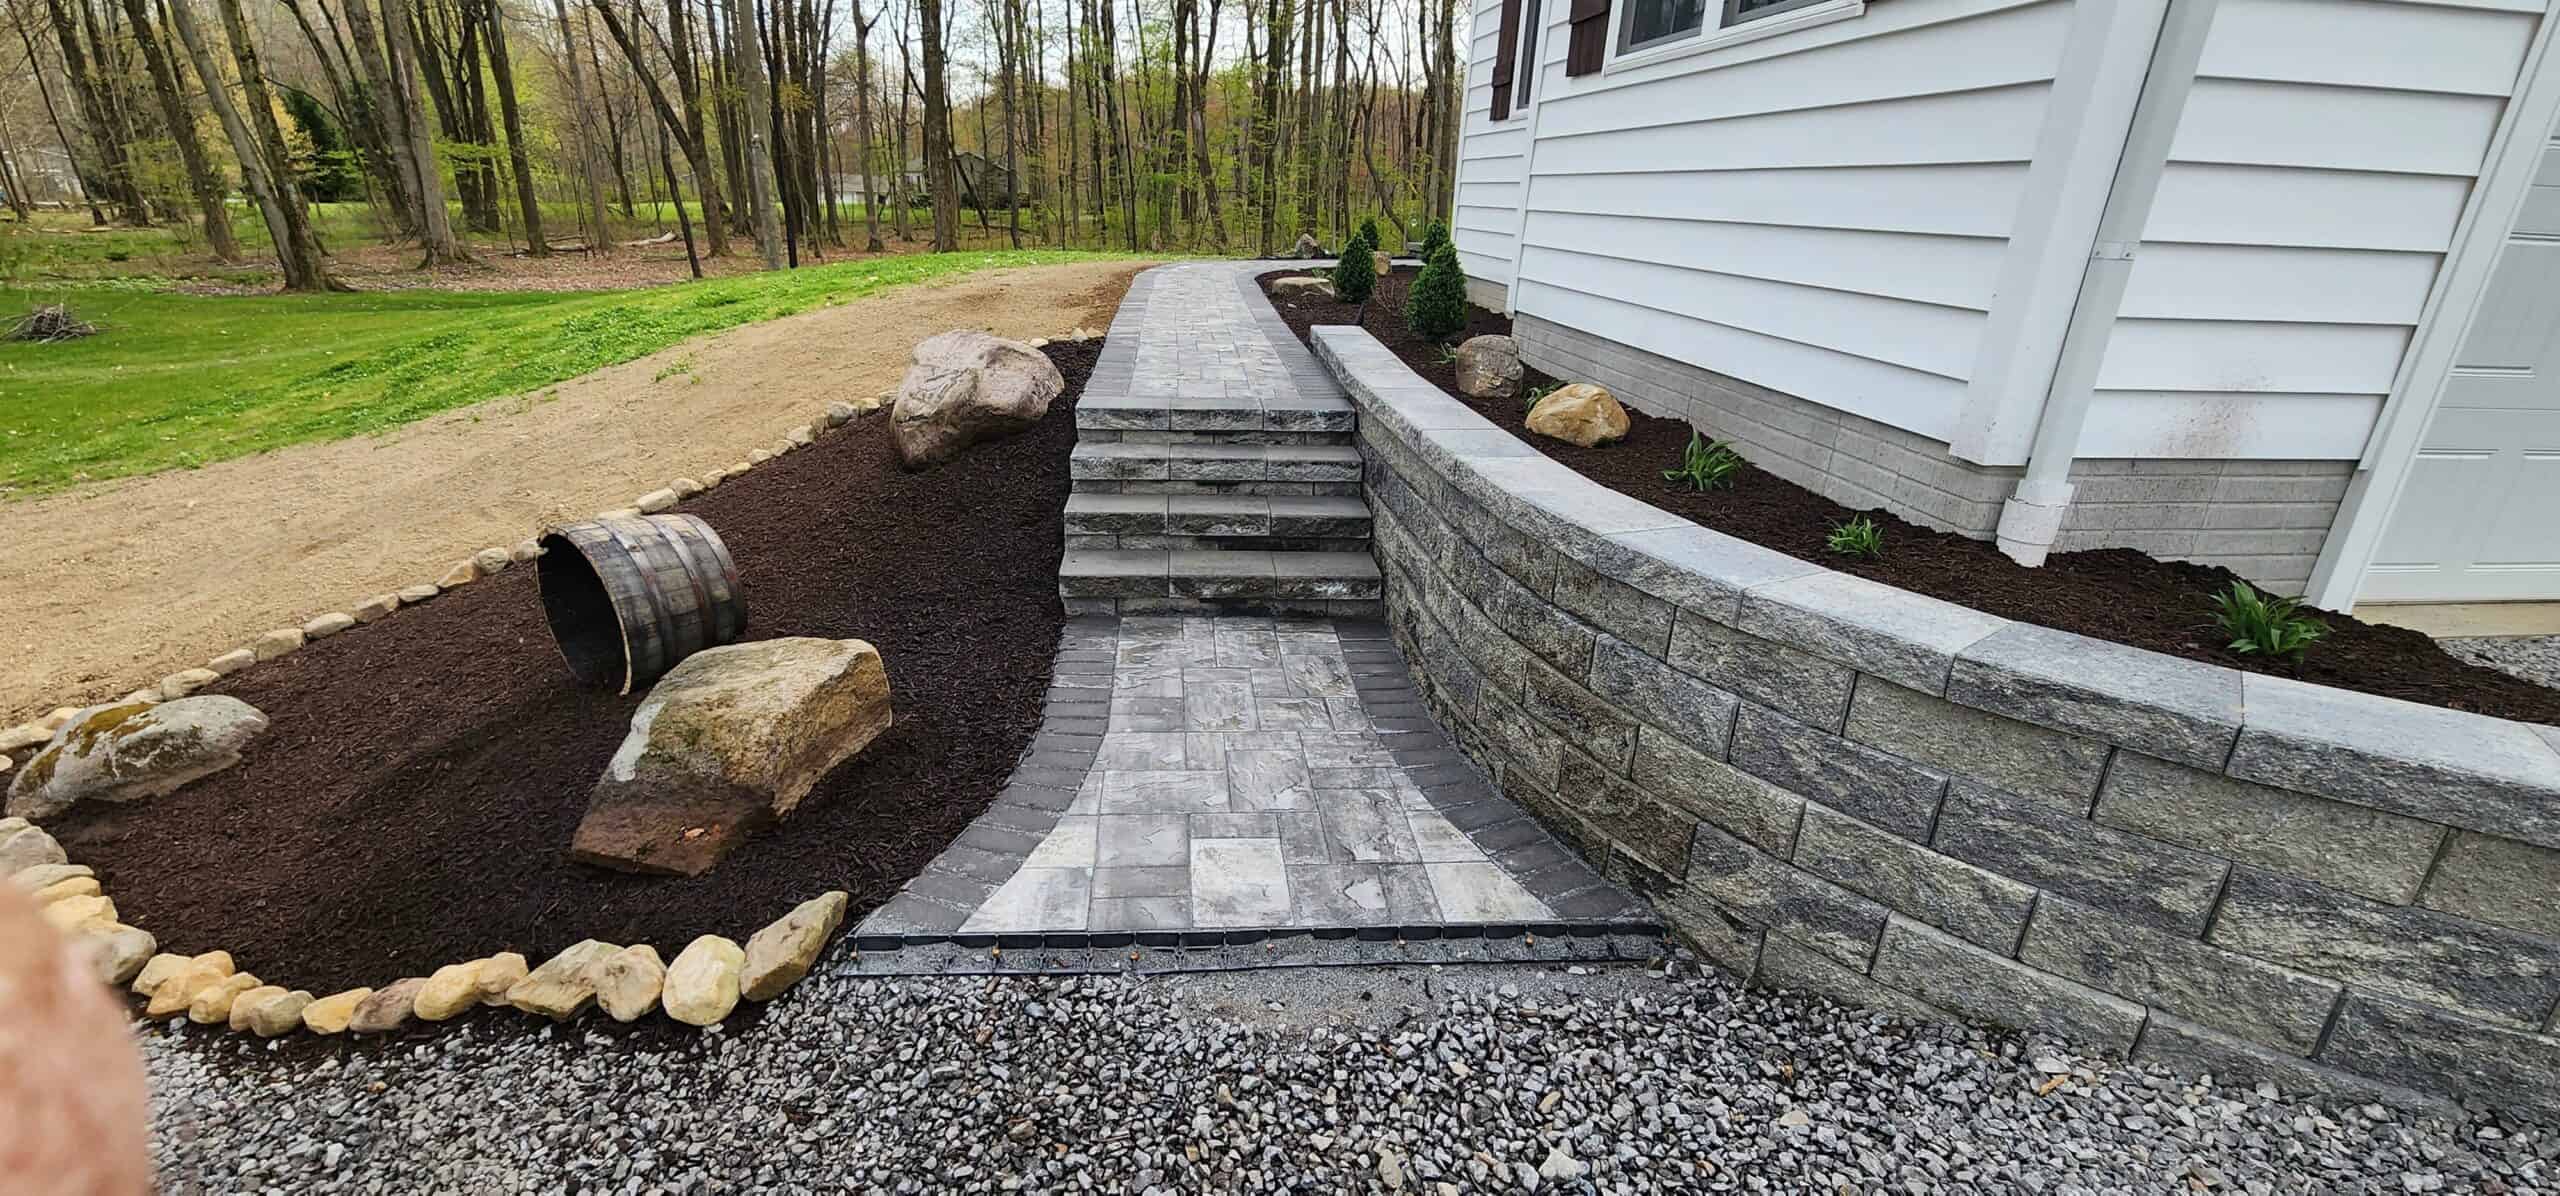 Hardscaping trends help PA homeowners express their love of nature and outdoor living